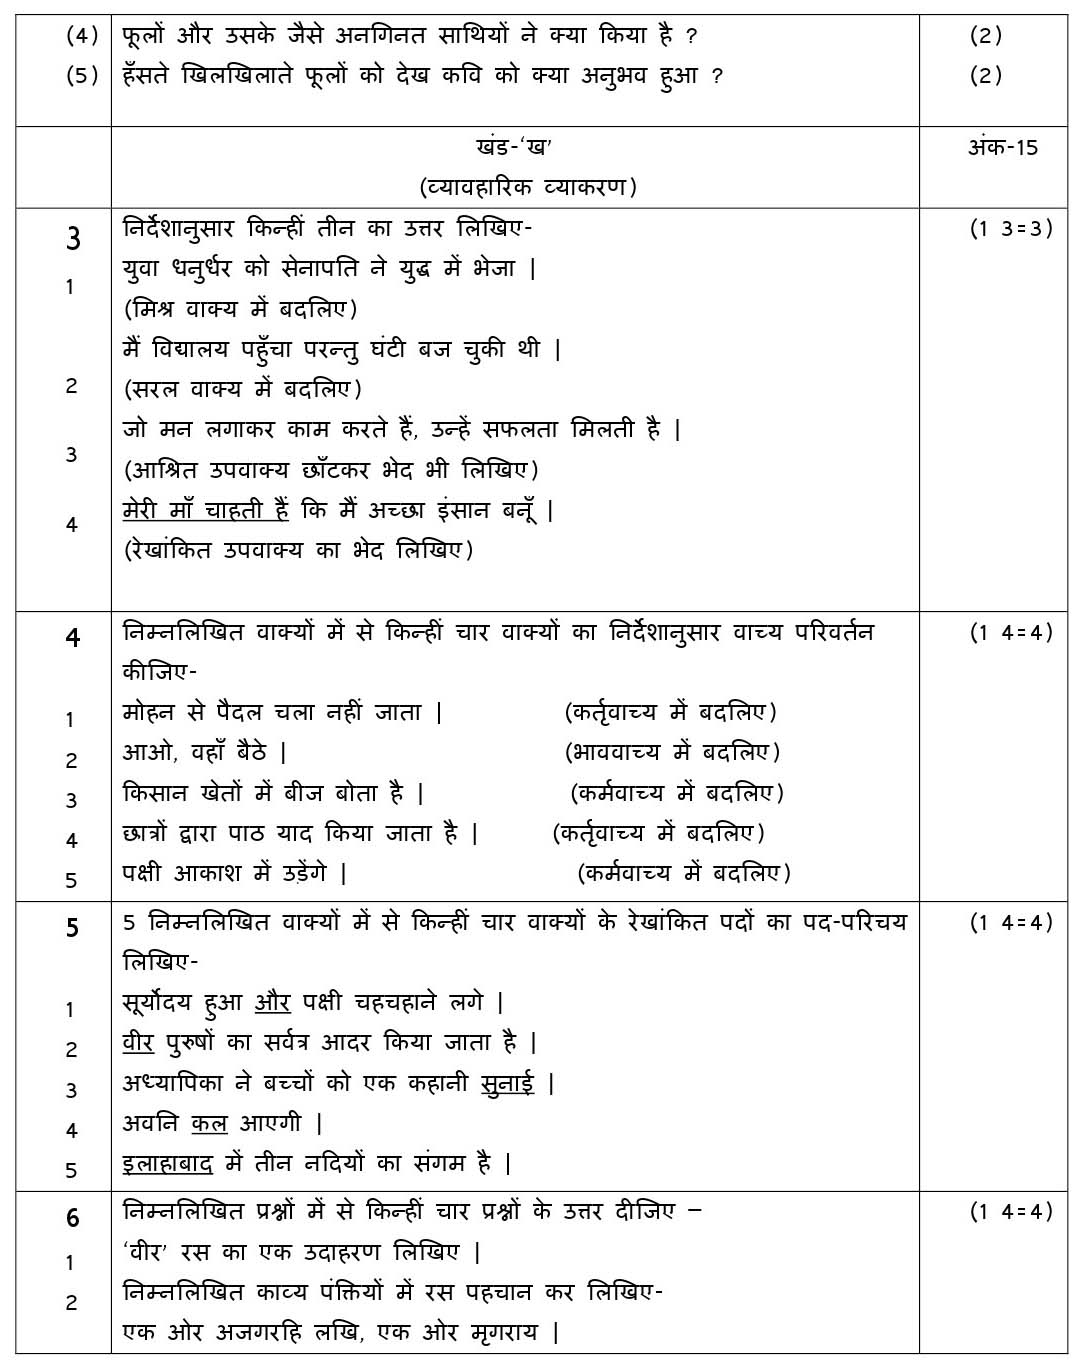 Hindi A CBSE Class X Sample Question Paper 2018-19 - Image 4